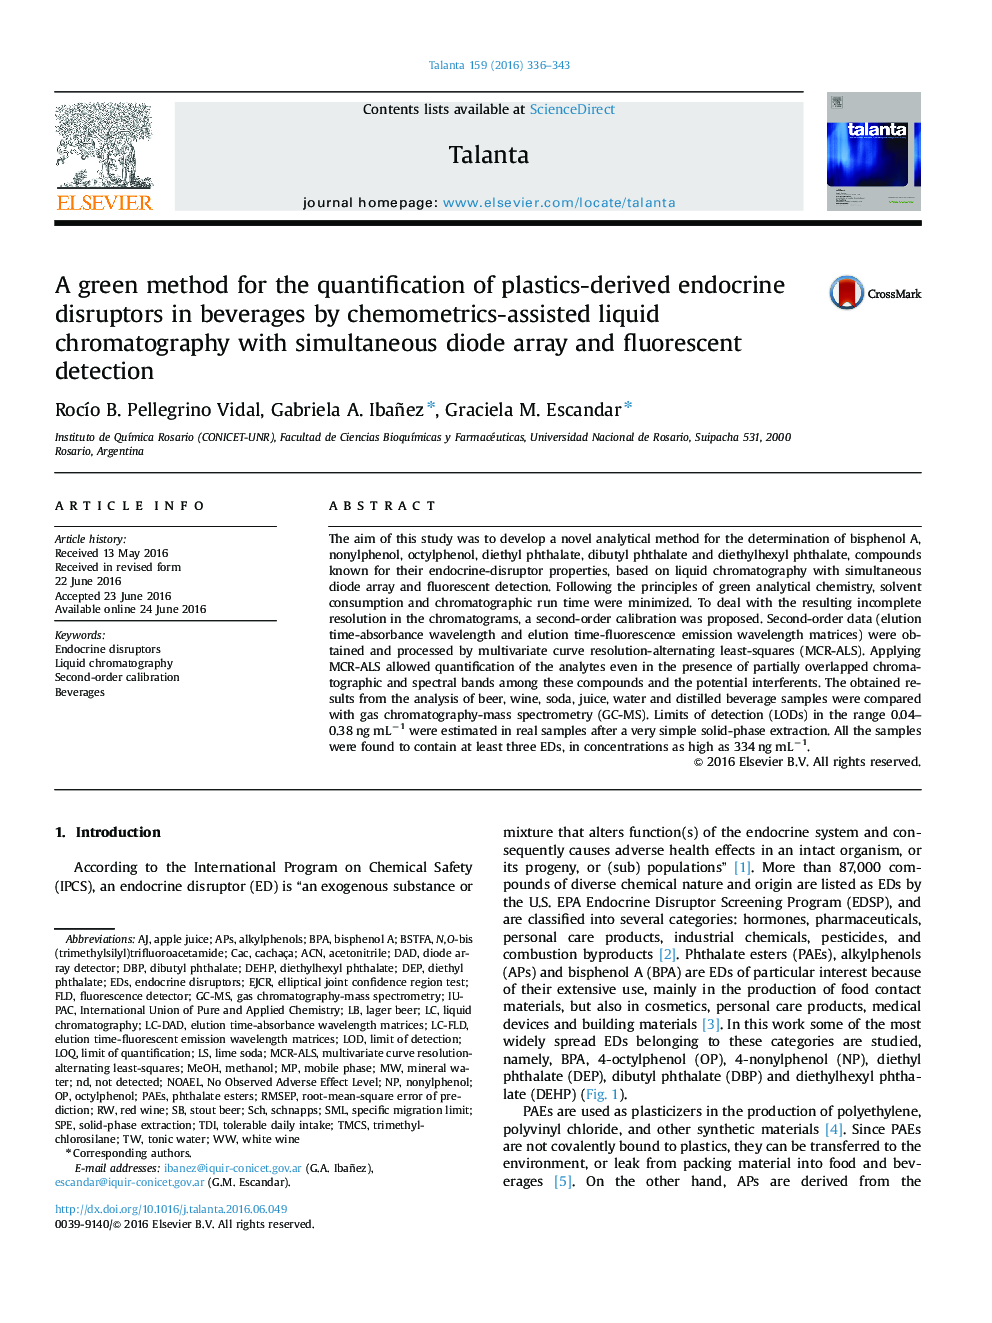 A green method for the quantification of plastics-derived endocrine disruptors in beverages by chemometrics-assisted liquid chromatography with simultaneous diode array and fluorescent detection